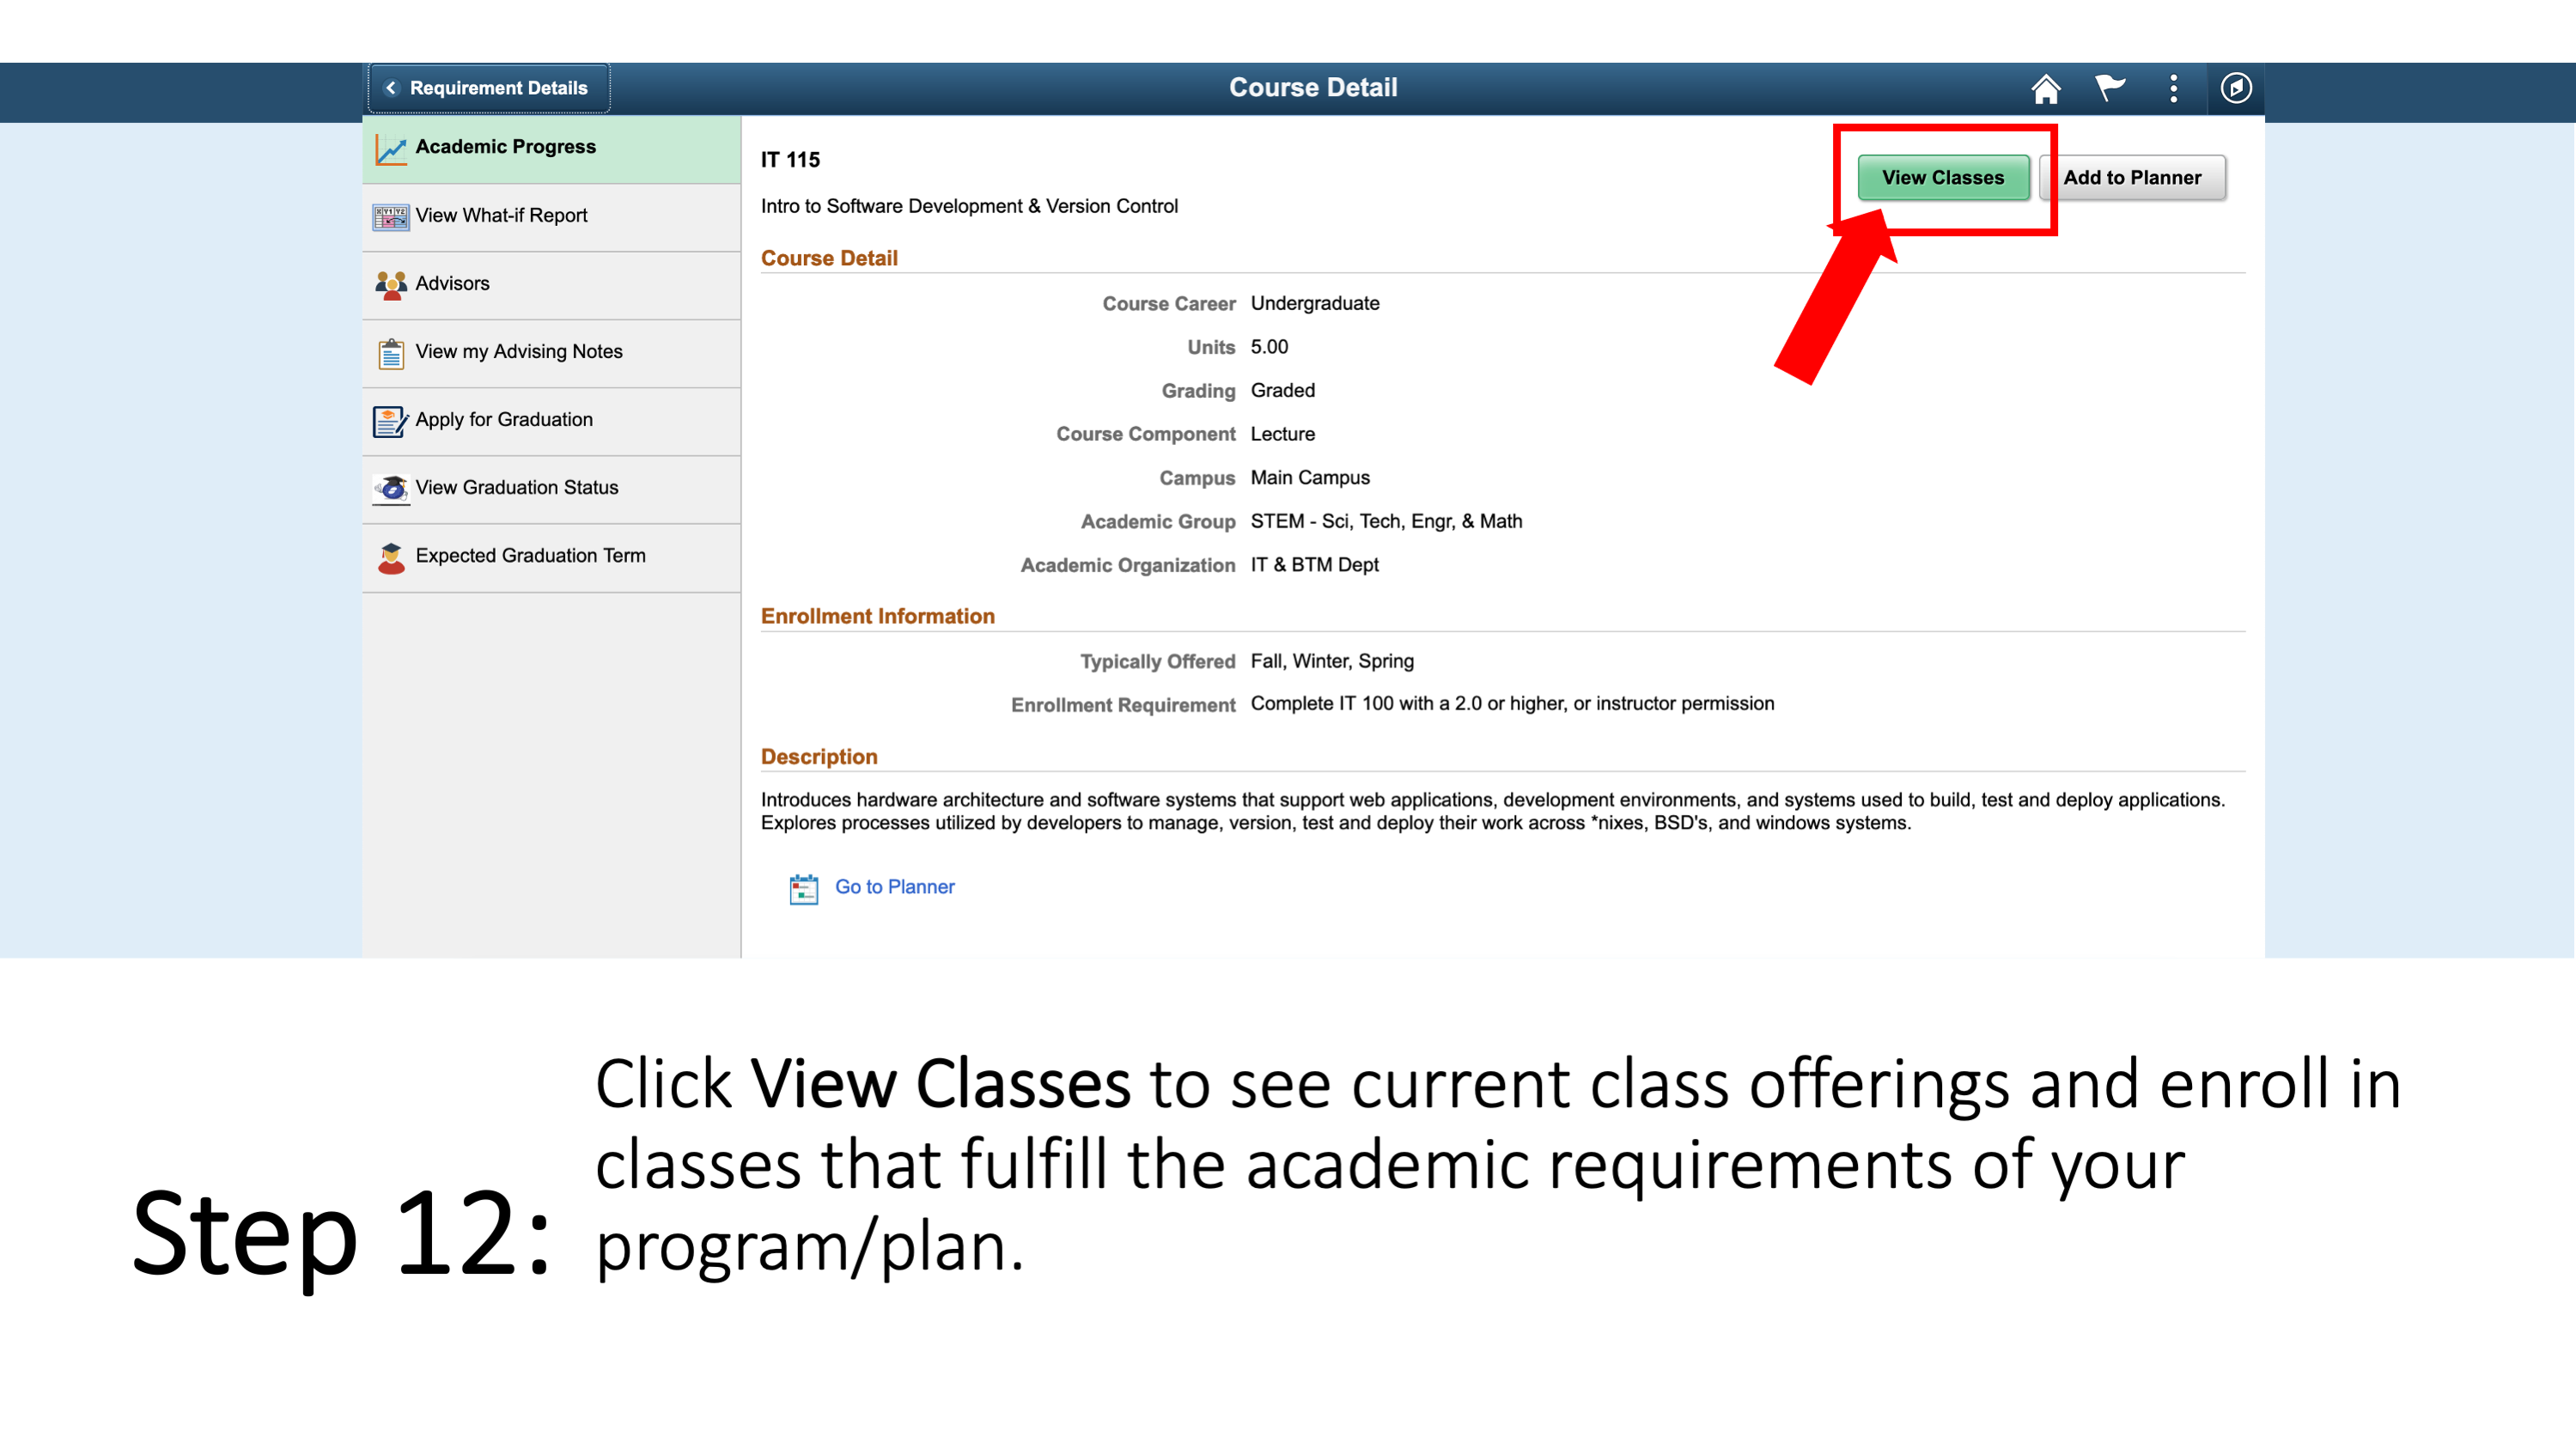 Step 12: Click View Classes to see current class offerings and enroll in classes that fulfill the academic requirements of your program/plan. 